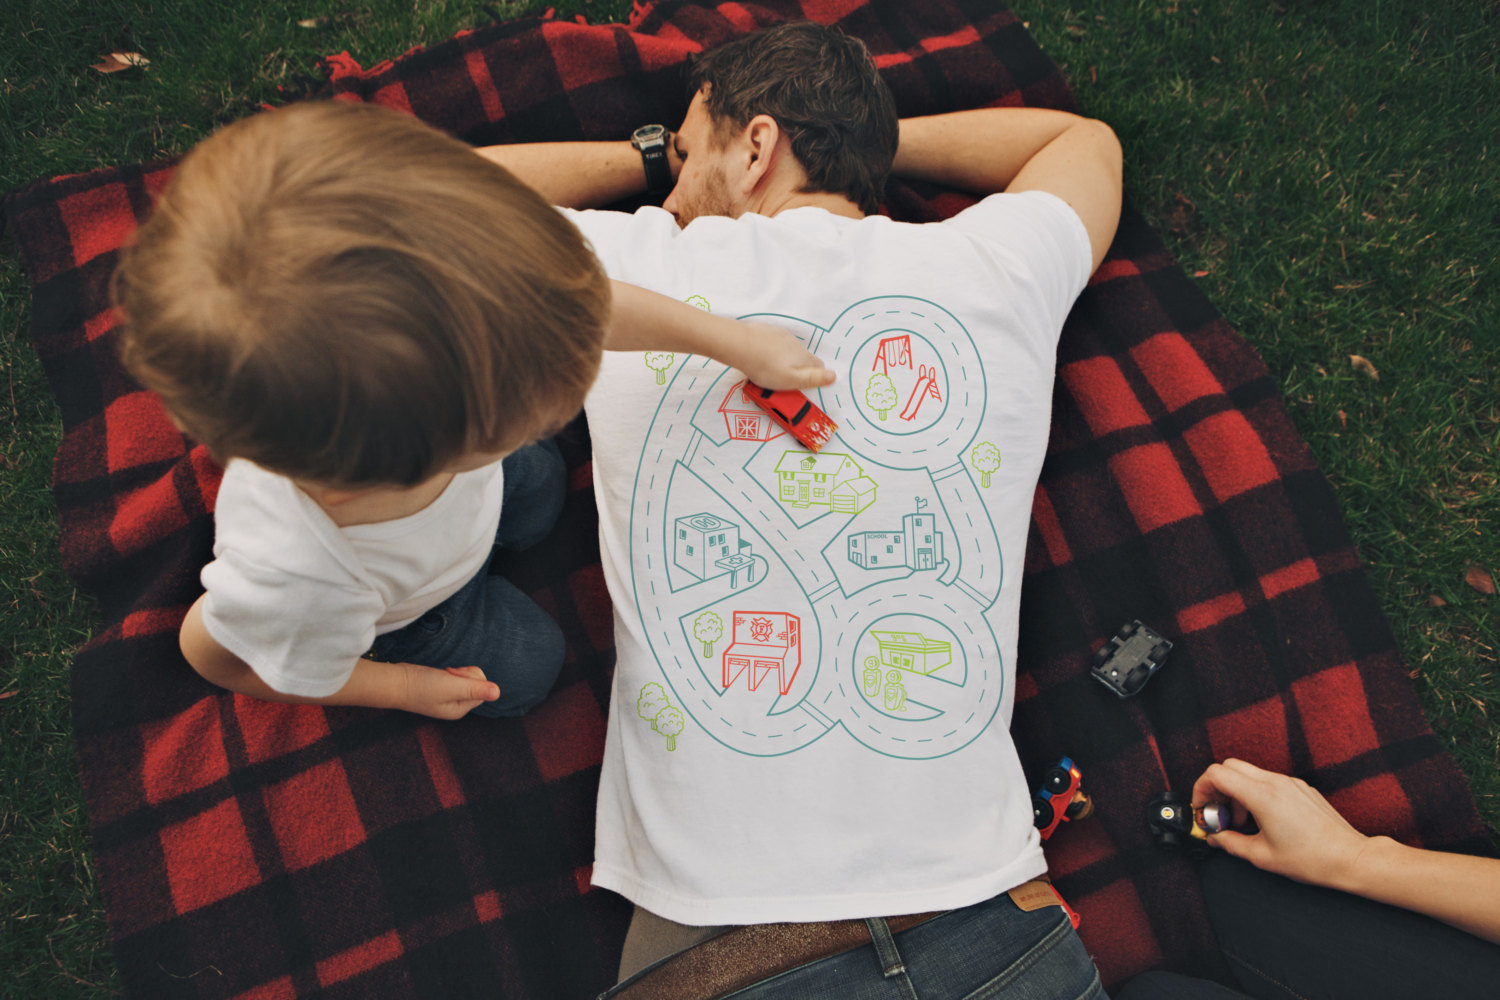 With this Car Play Mat Shirt, you can sort of have a break.